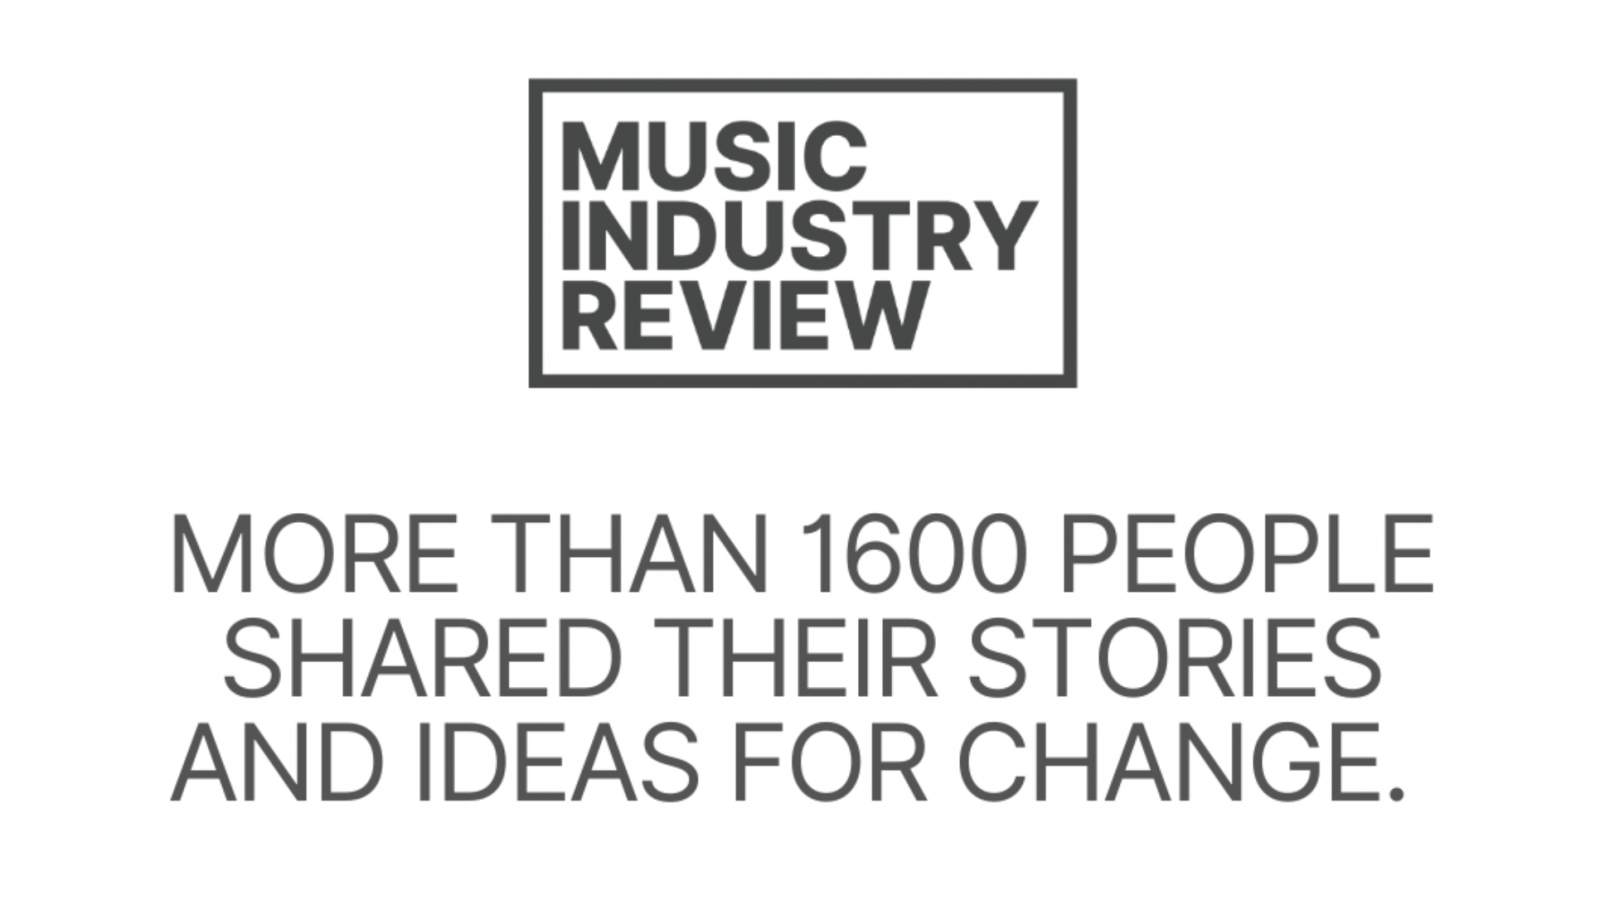 Music Industry Review logo and text reading More than 1600 people shared their stories and ideas for change.